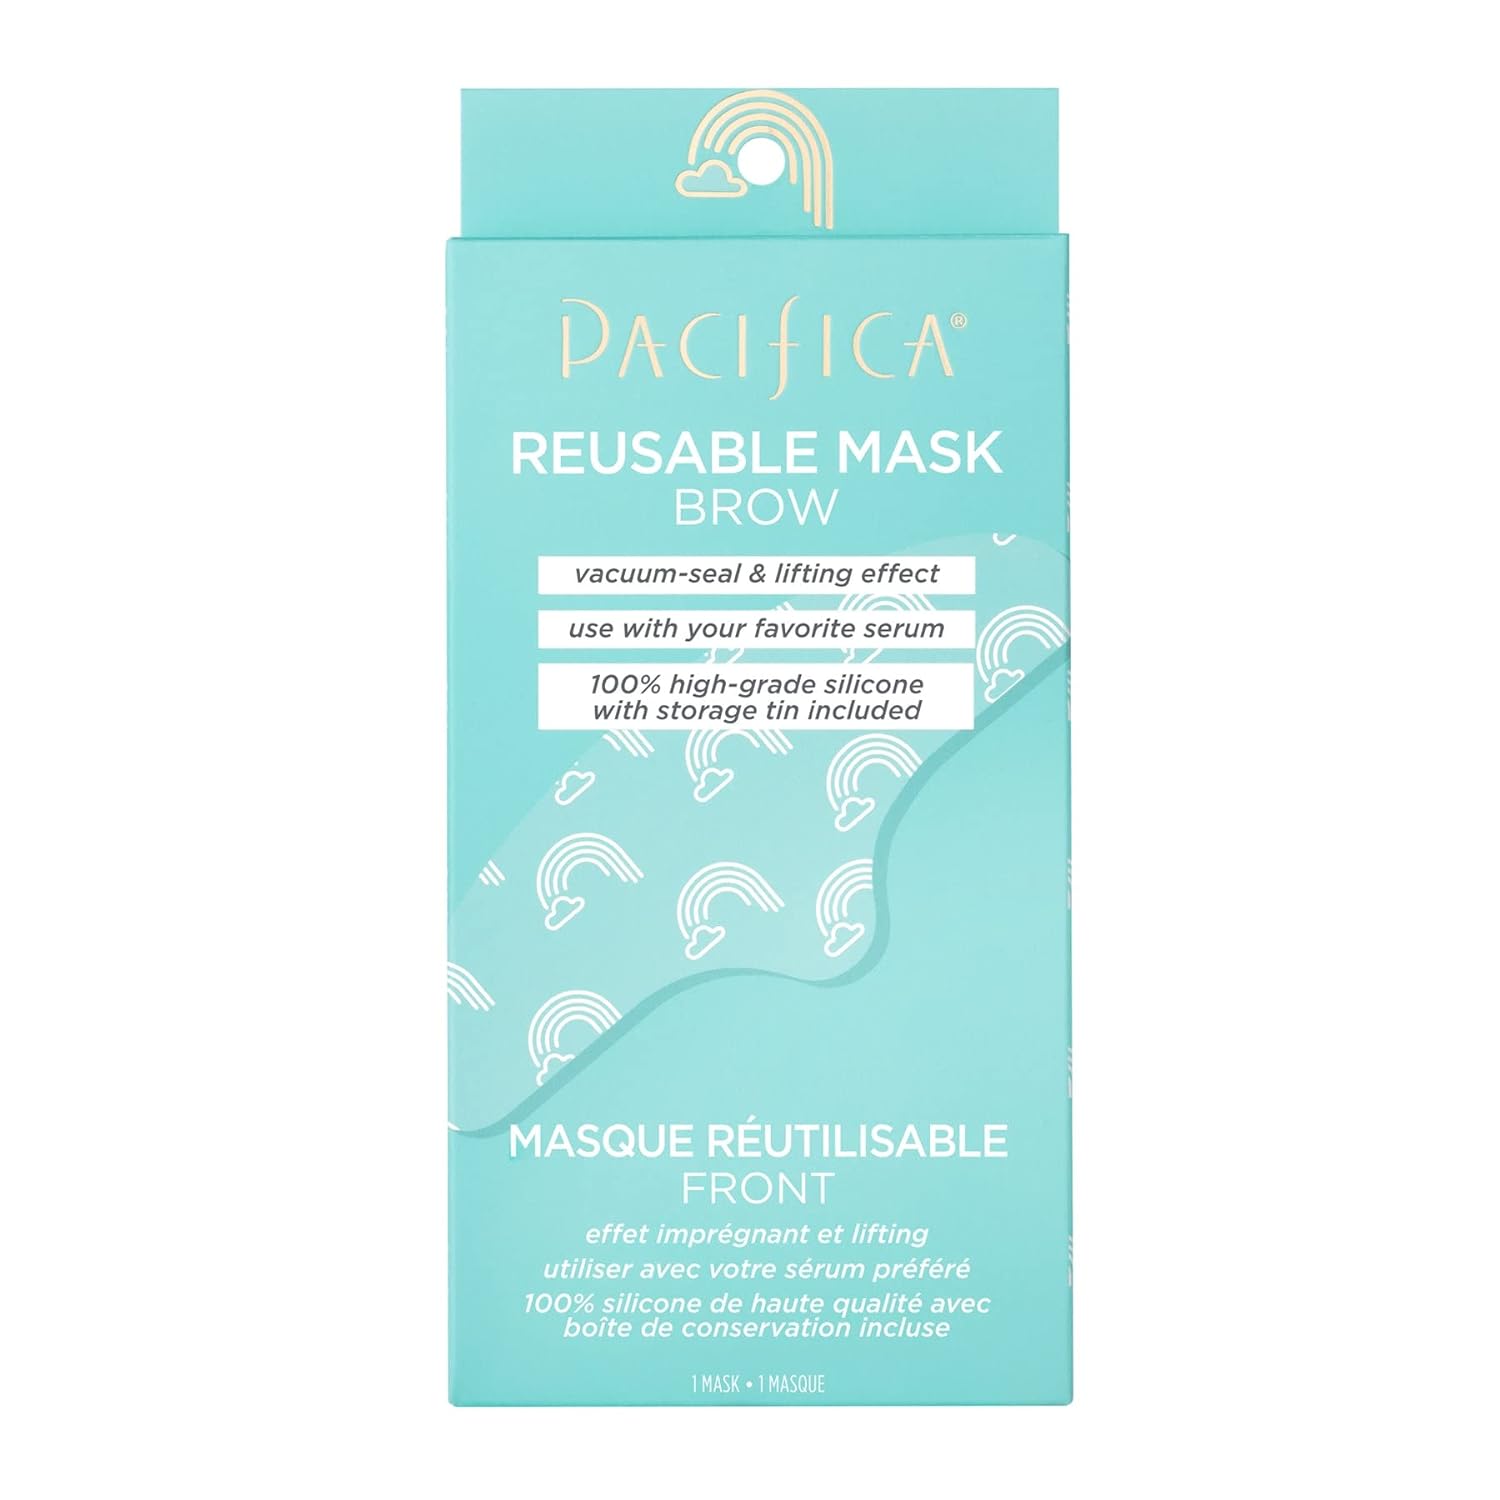 Pacifica Beauty, Reusable Brow Mask, 100% Silicone, Vacuum Seal & Lifting Effect, Minimize Fine Lines + Wrinkles, Pair with Serum, Storage Tin Included, Vegan & Cruelty Free